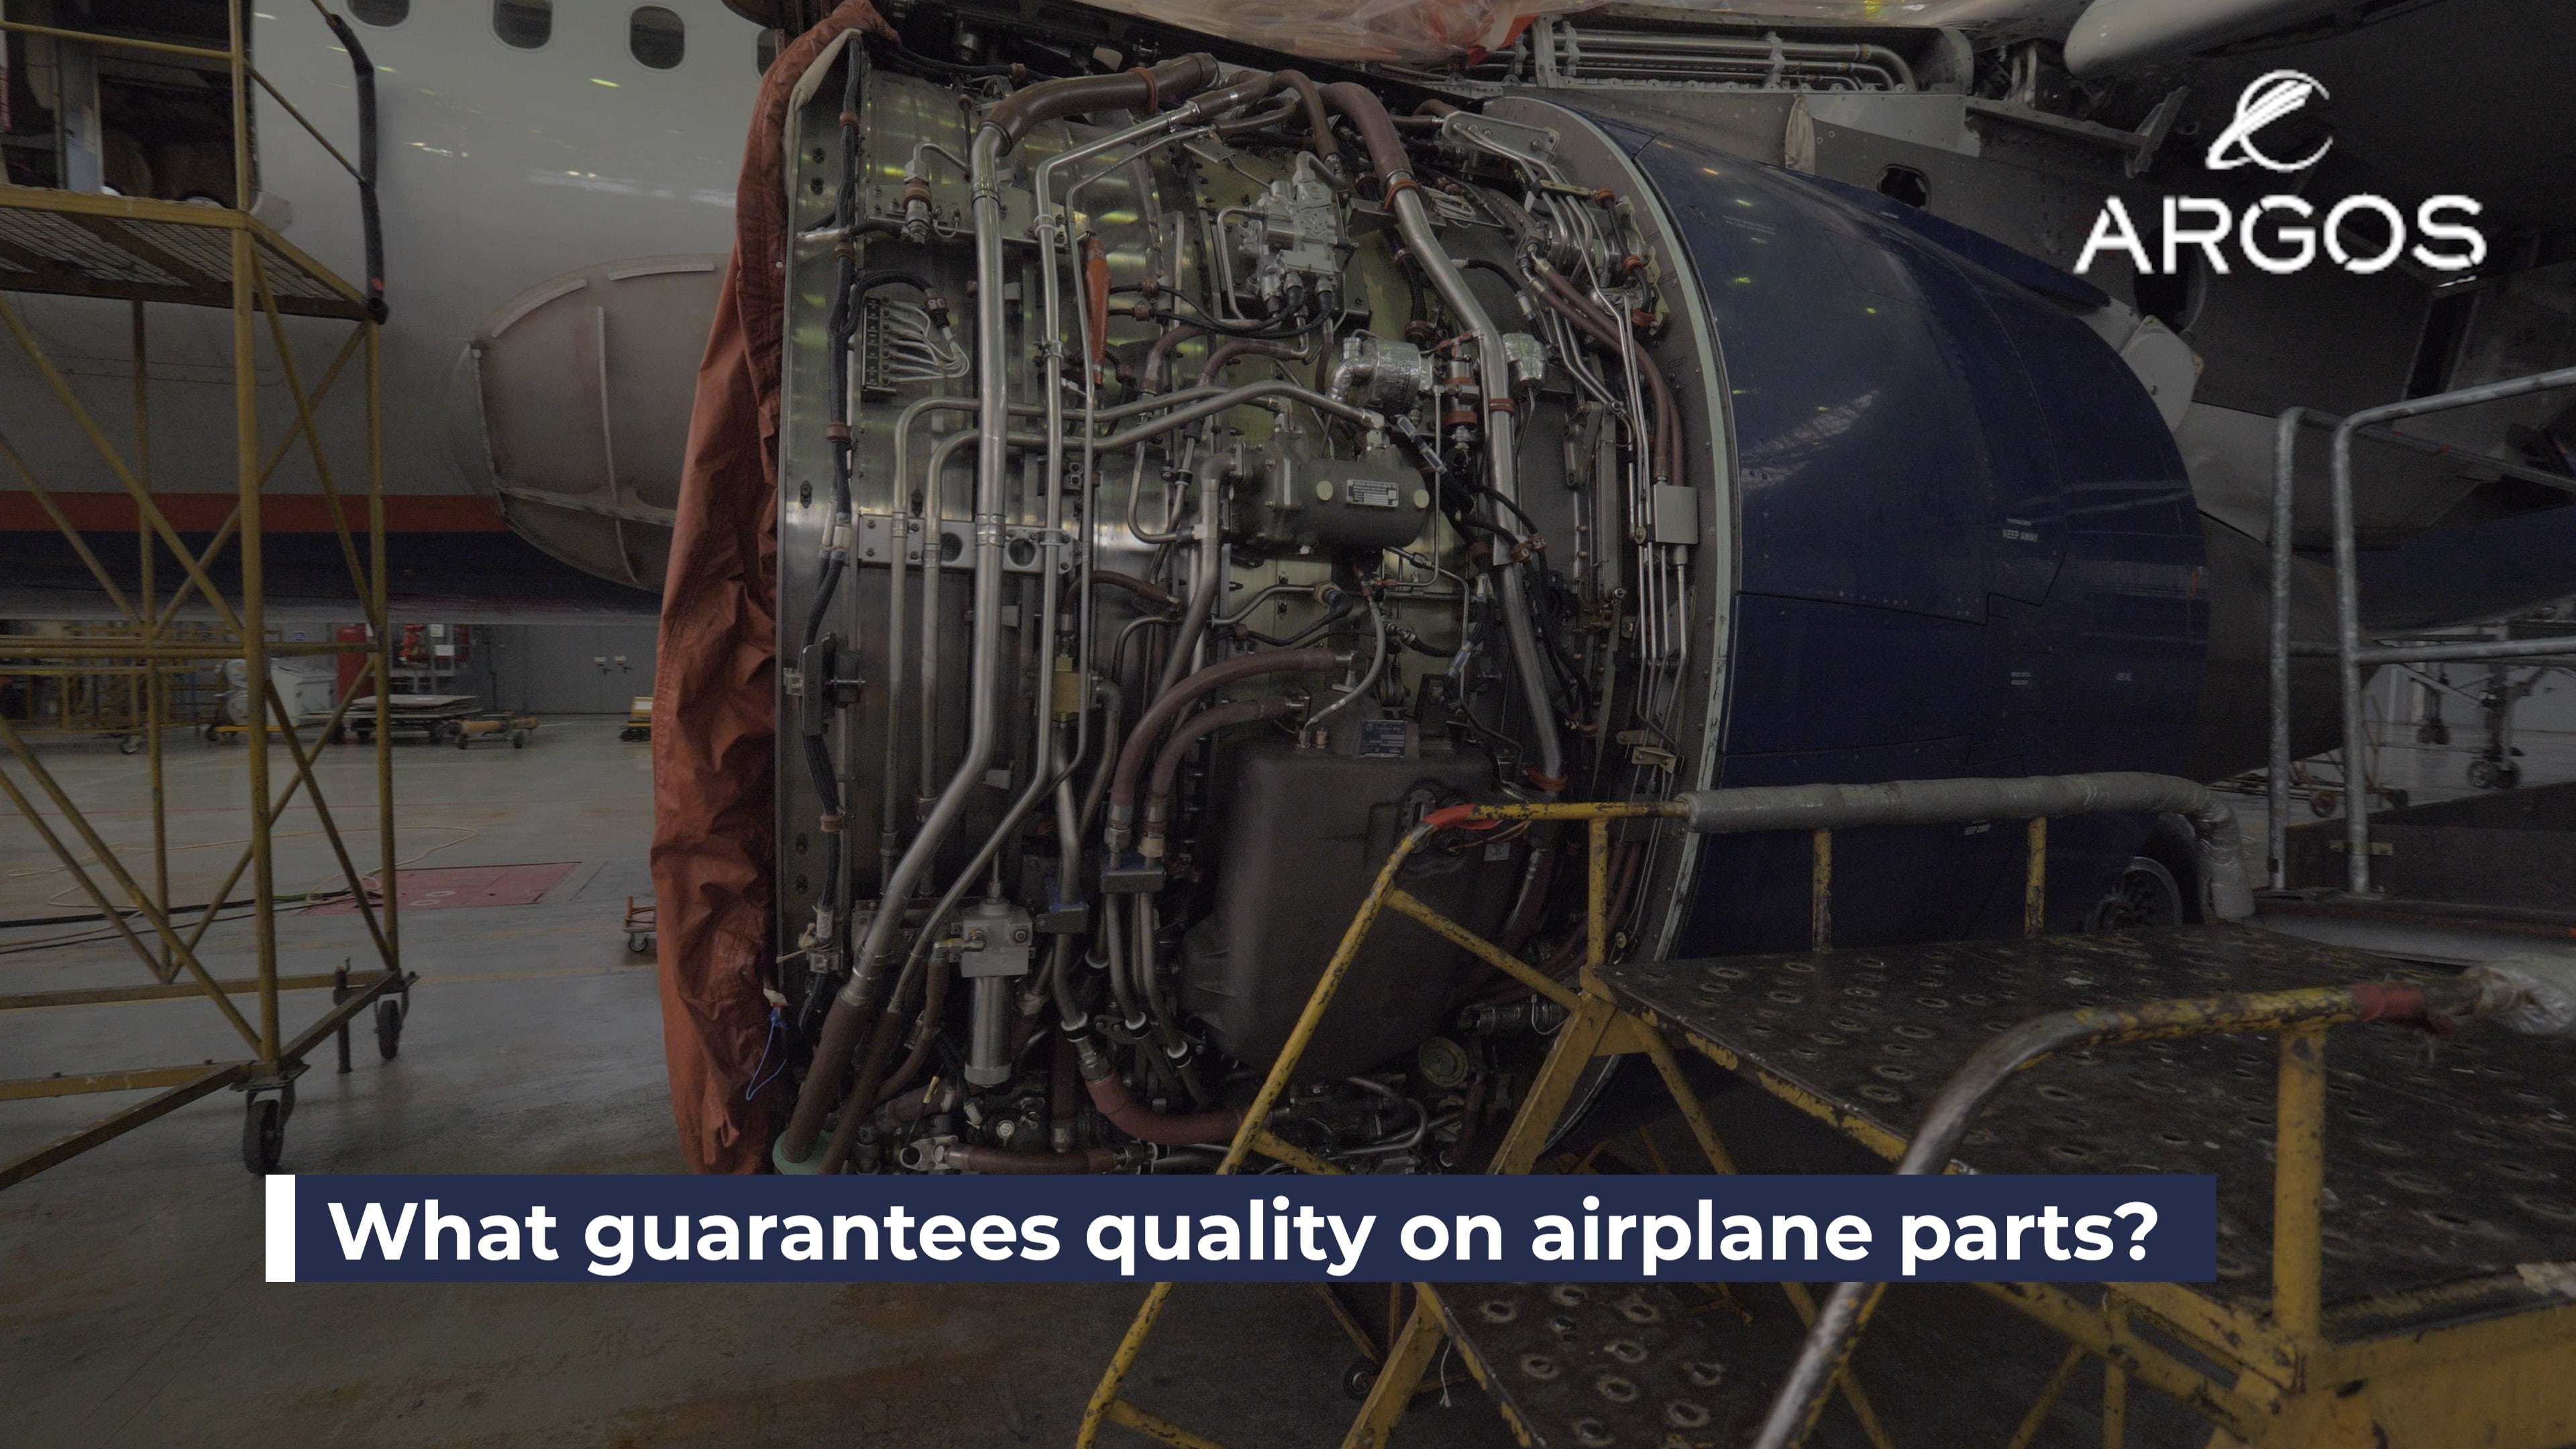 WHAT GUARANTEES QUALITY FOR THE AVIATION AND SPACE INDUSTRY?